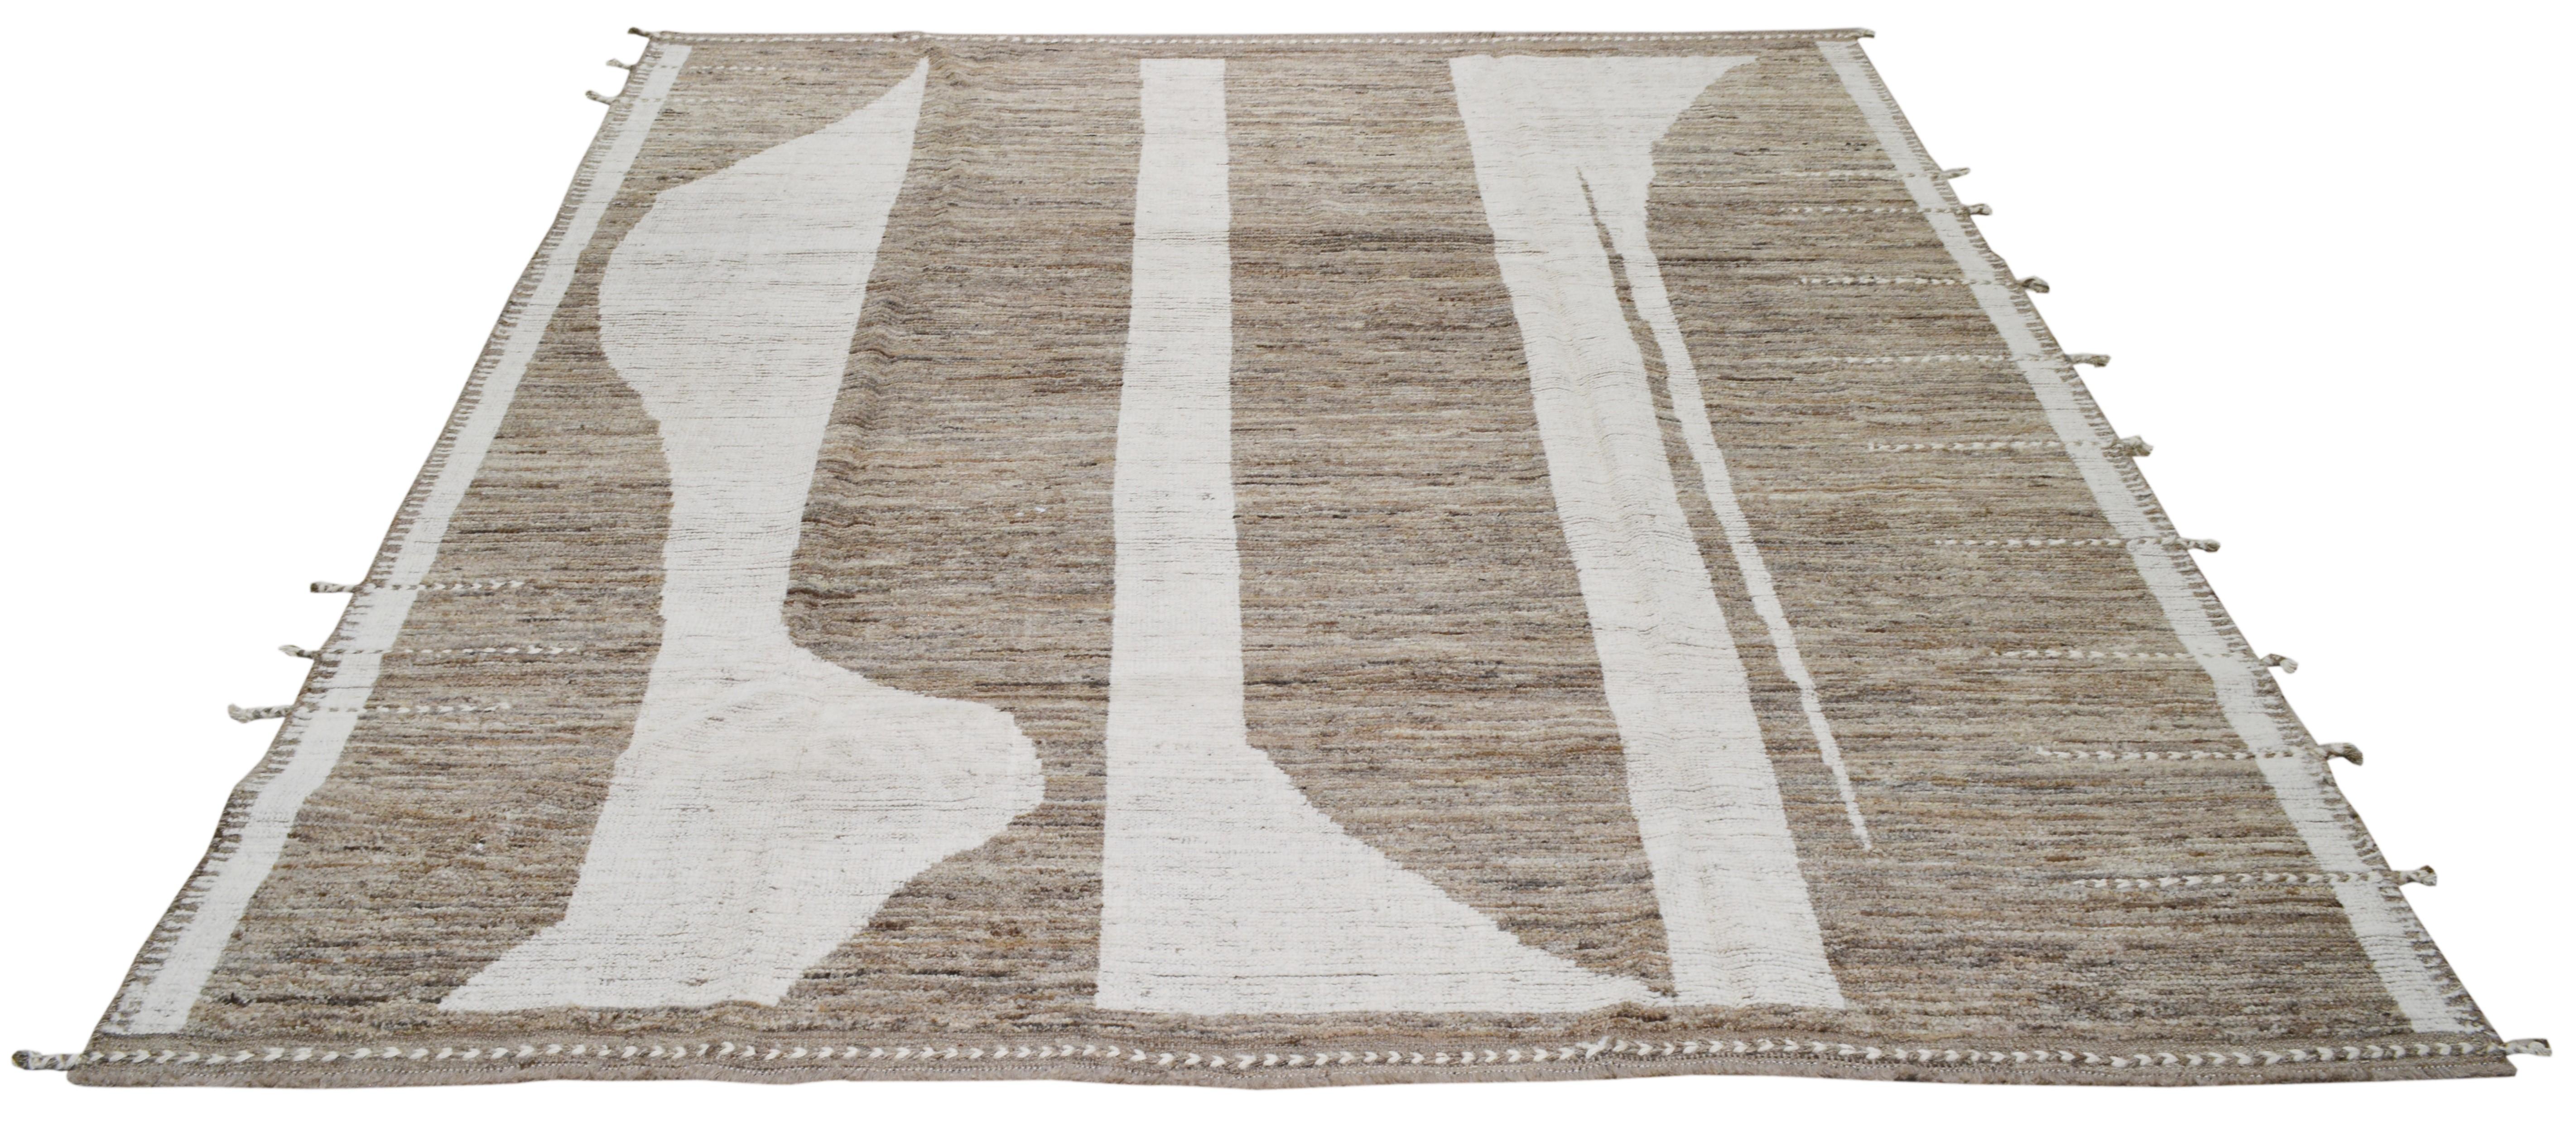 Moroccan Rug
100% Wool hand knotted / hand made Moroccan rug
Color: Sand, beige, brown
Natural earthy colors look great with all styles, and will compliment any room.
Style: Abstract rug
Size: 8’10” x 9’10”.